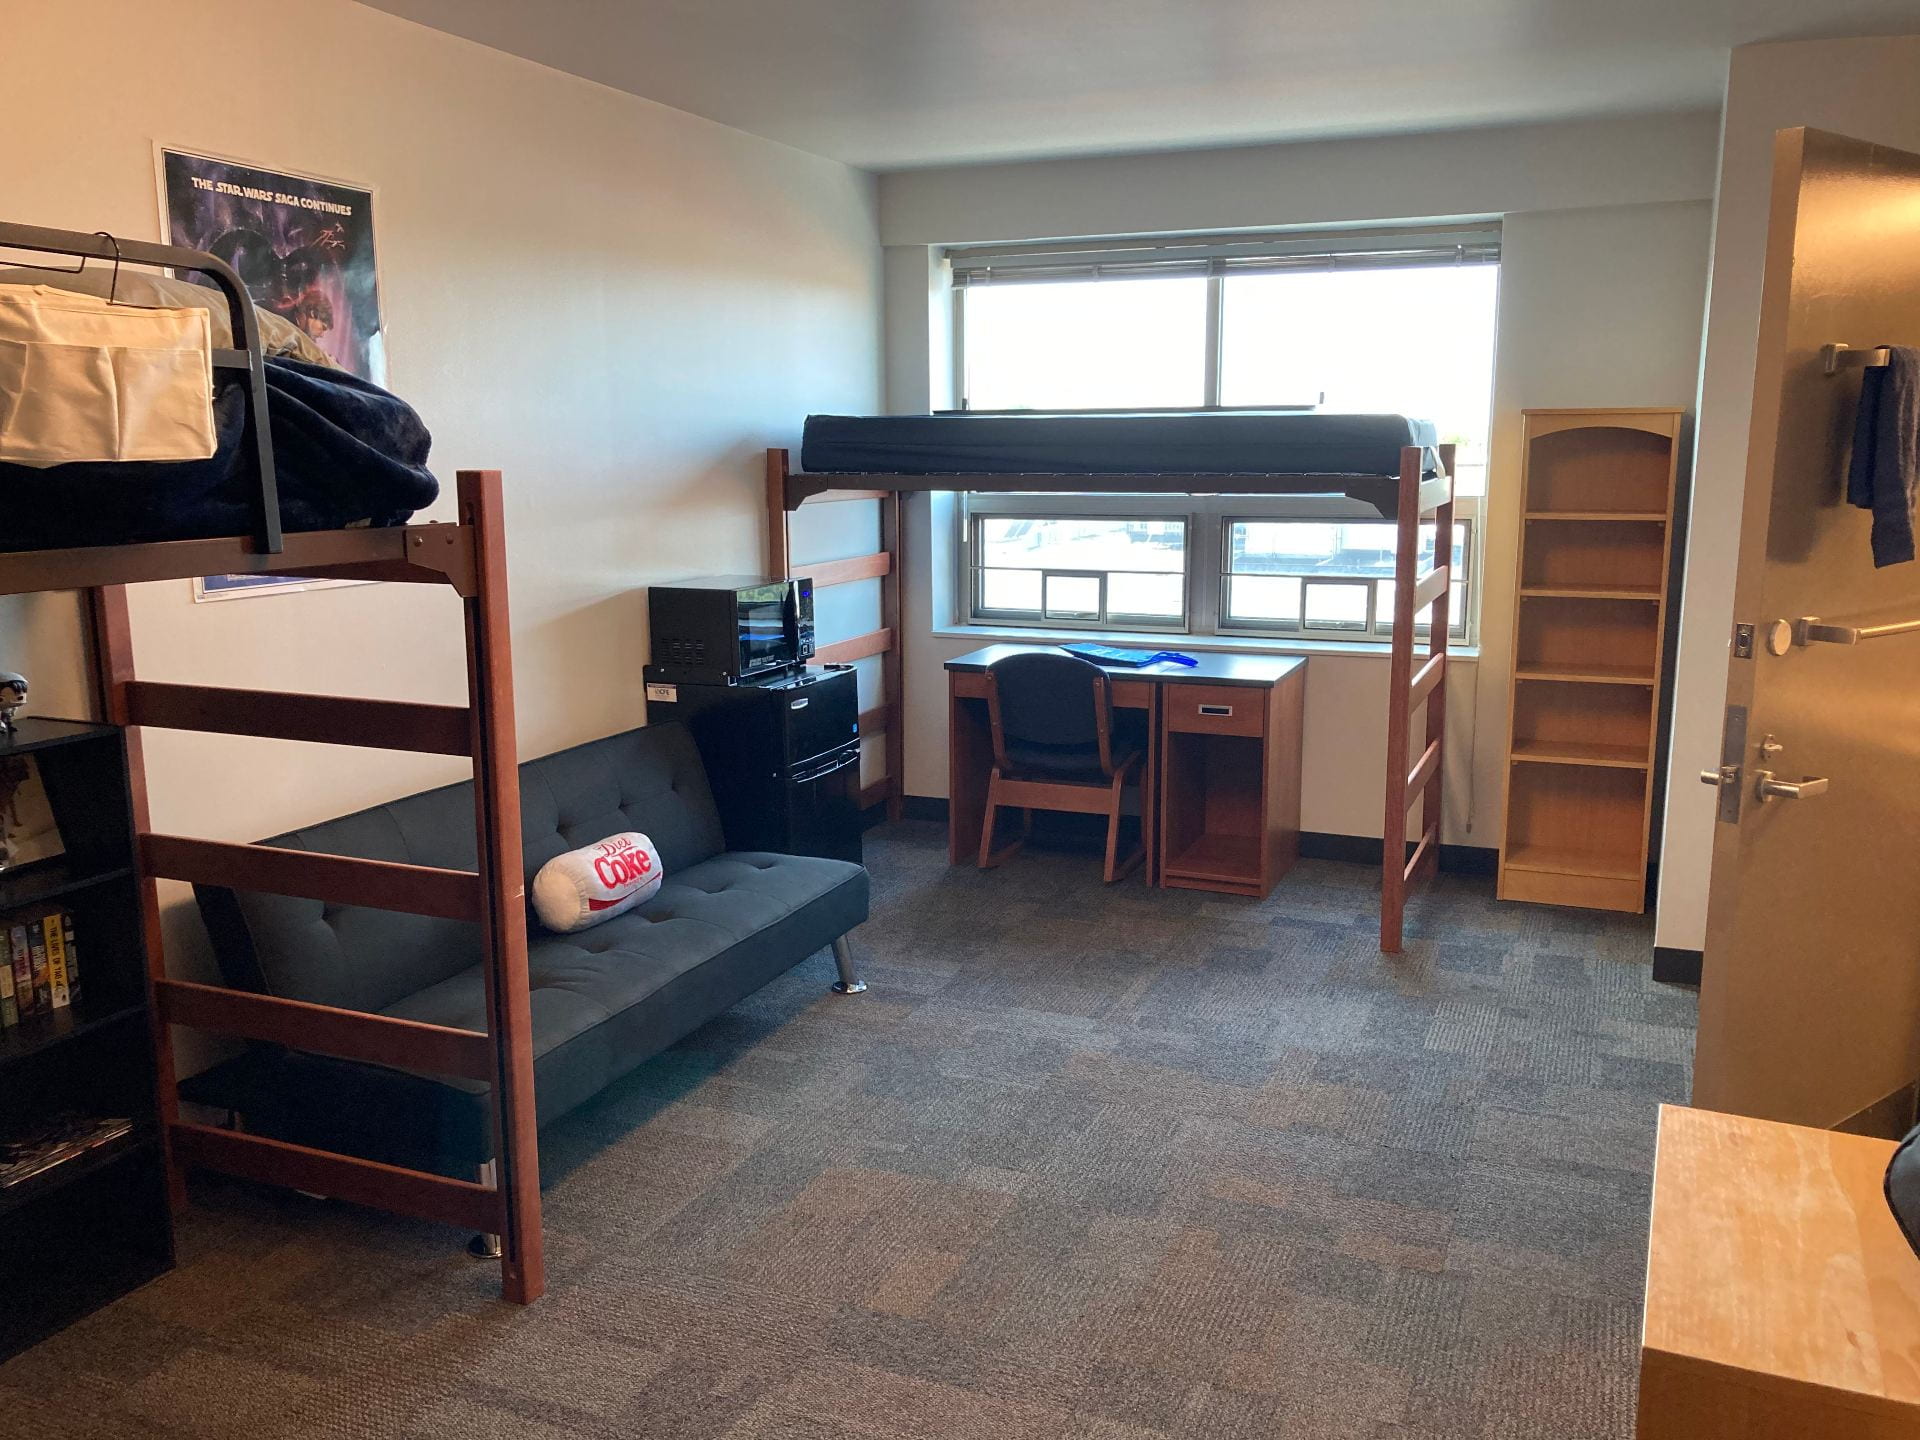 A picture of Jeff’s dorm room in the Honors Living Learning Community in Ozanam Hall